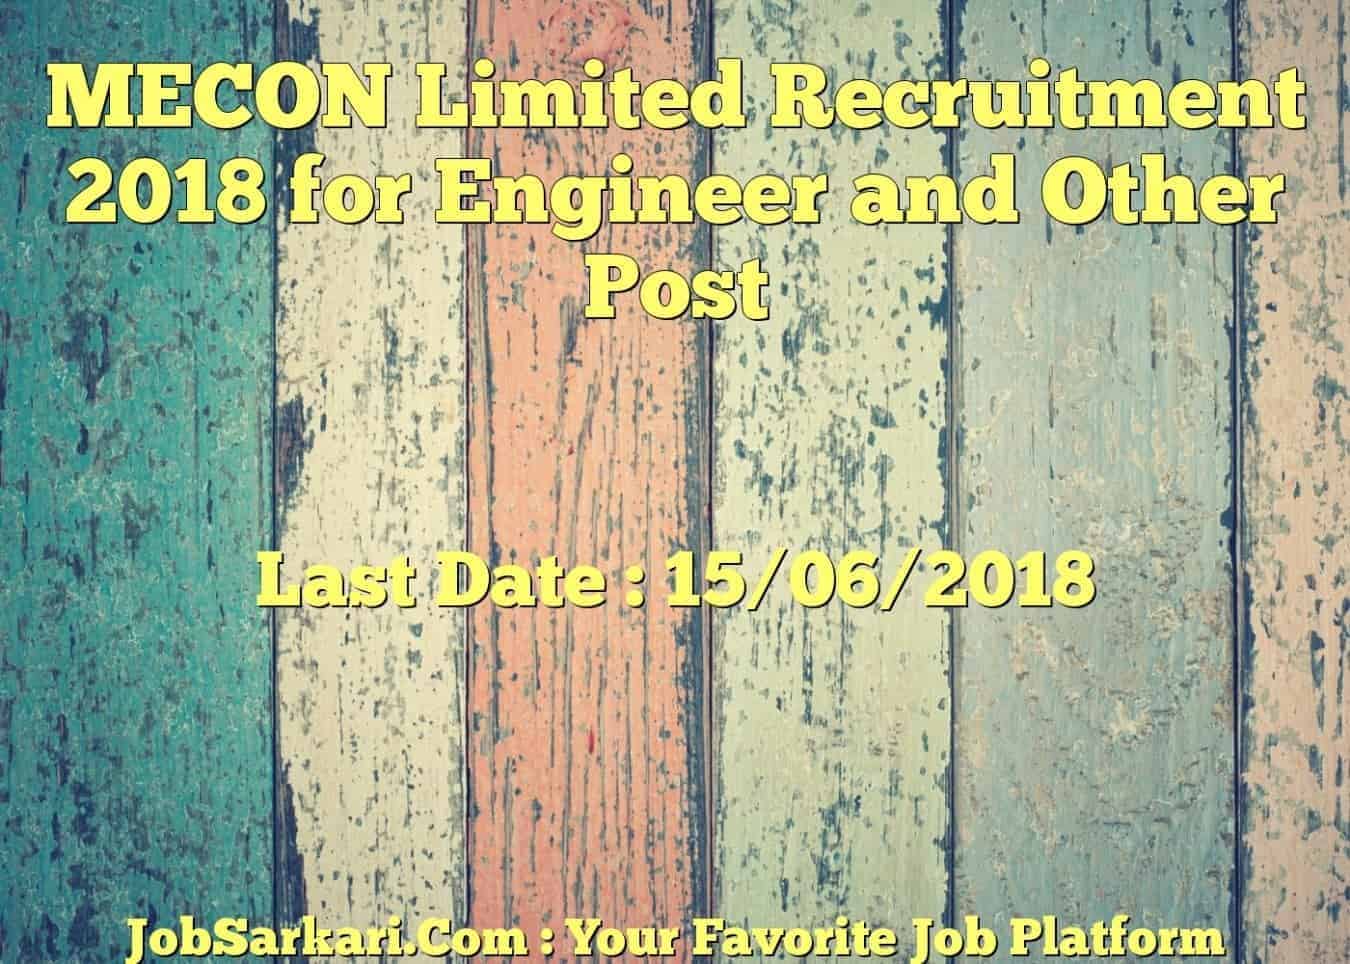 MECON Limited Recruitment 2018 for Engineer and Other Post